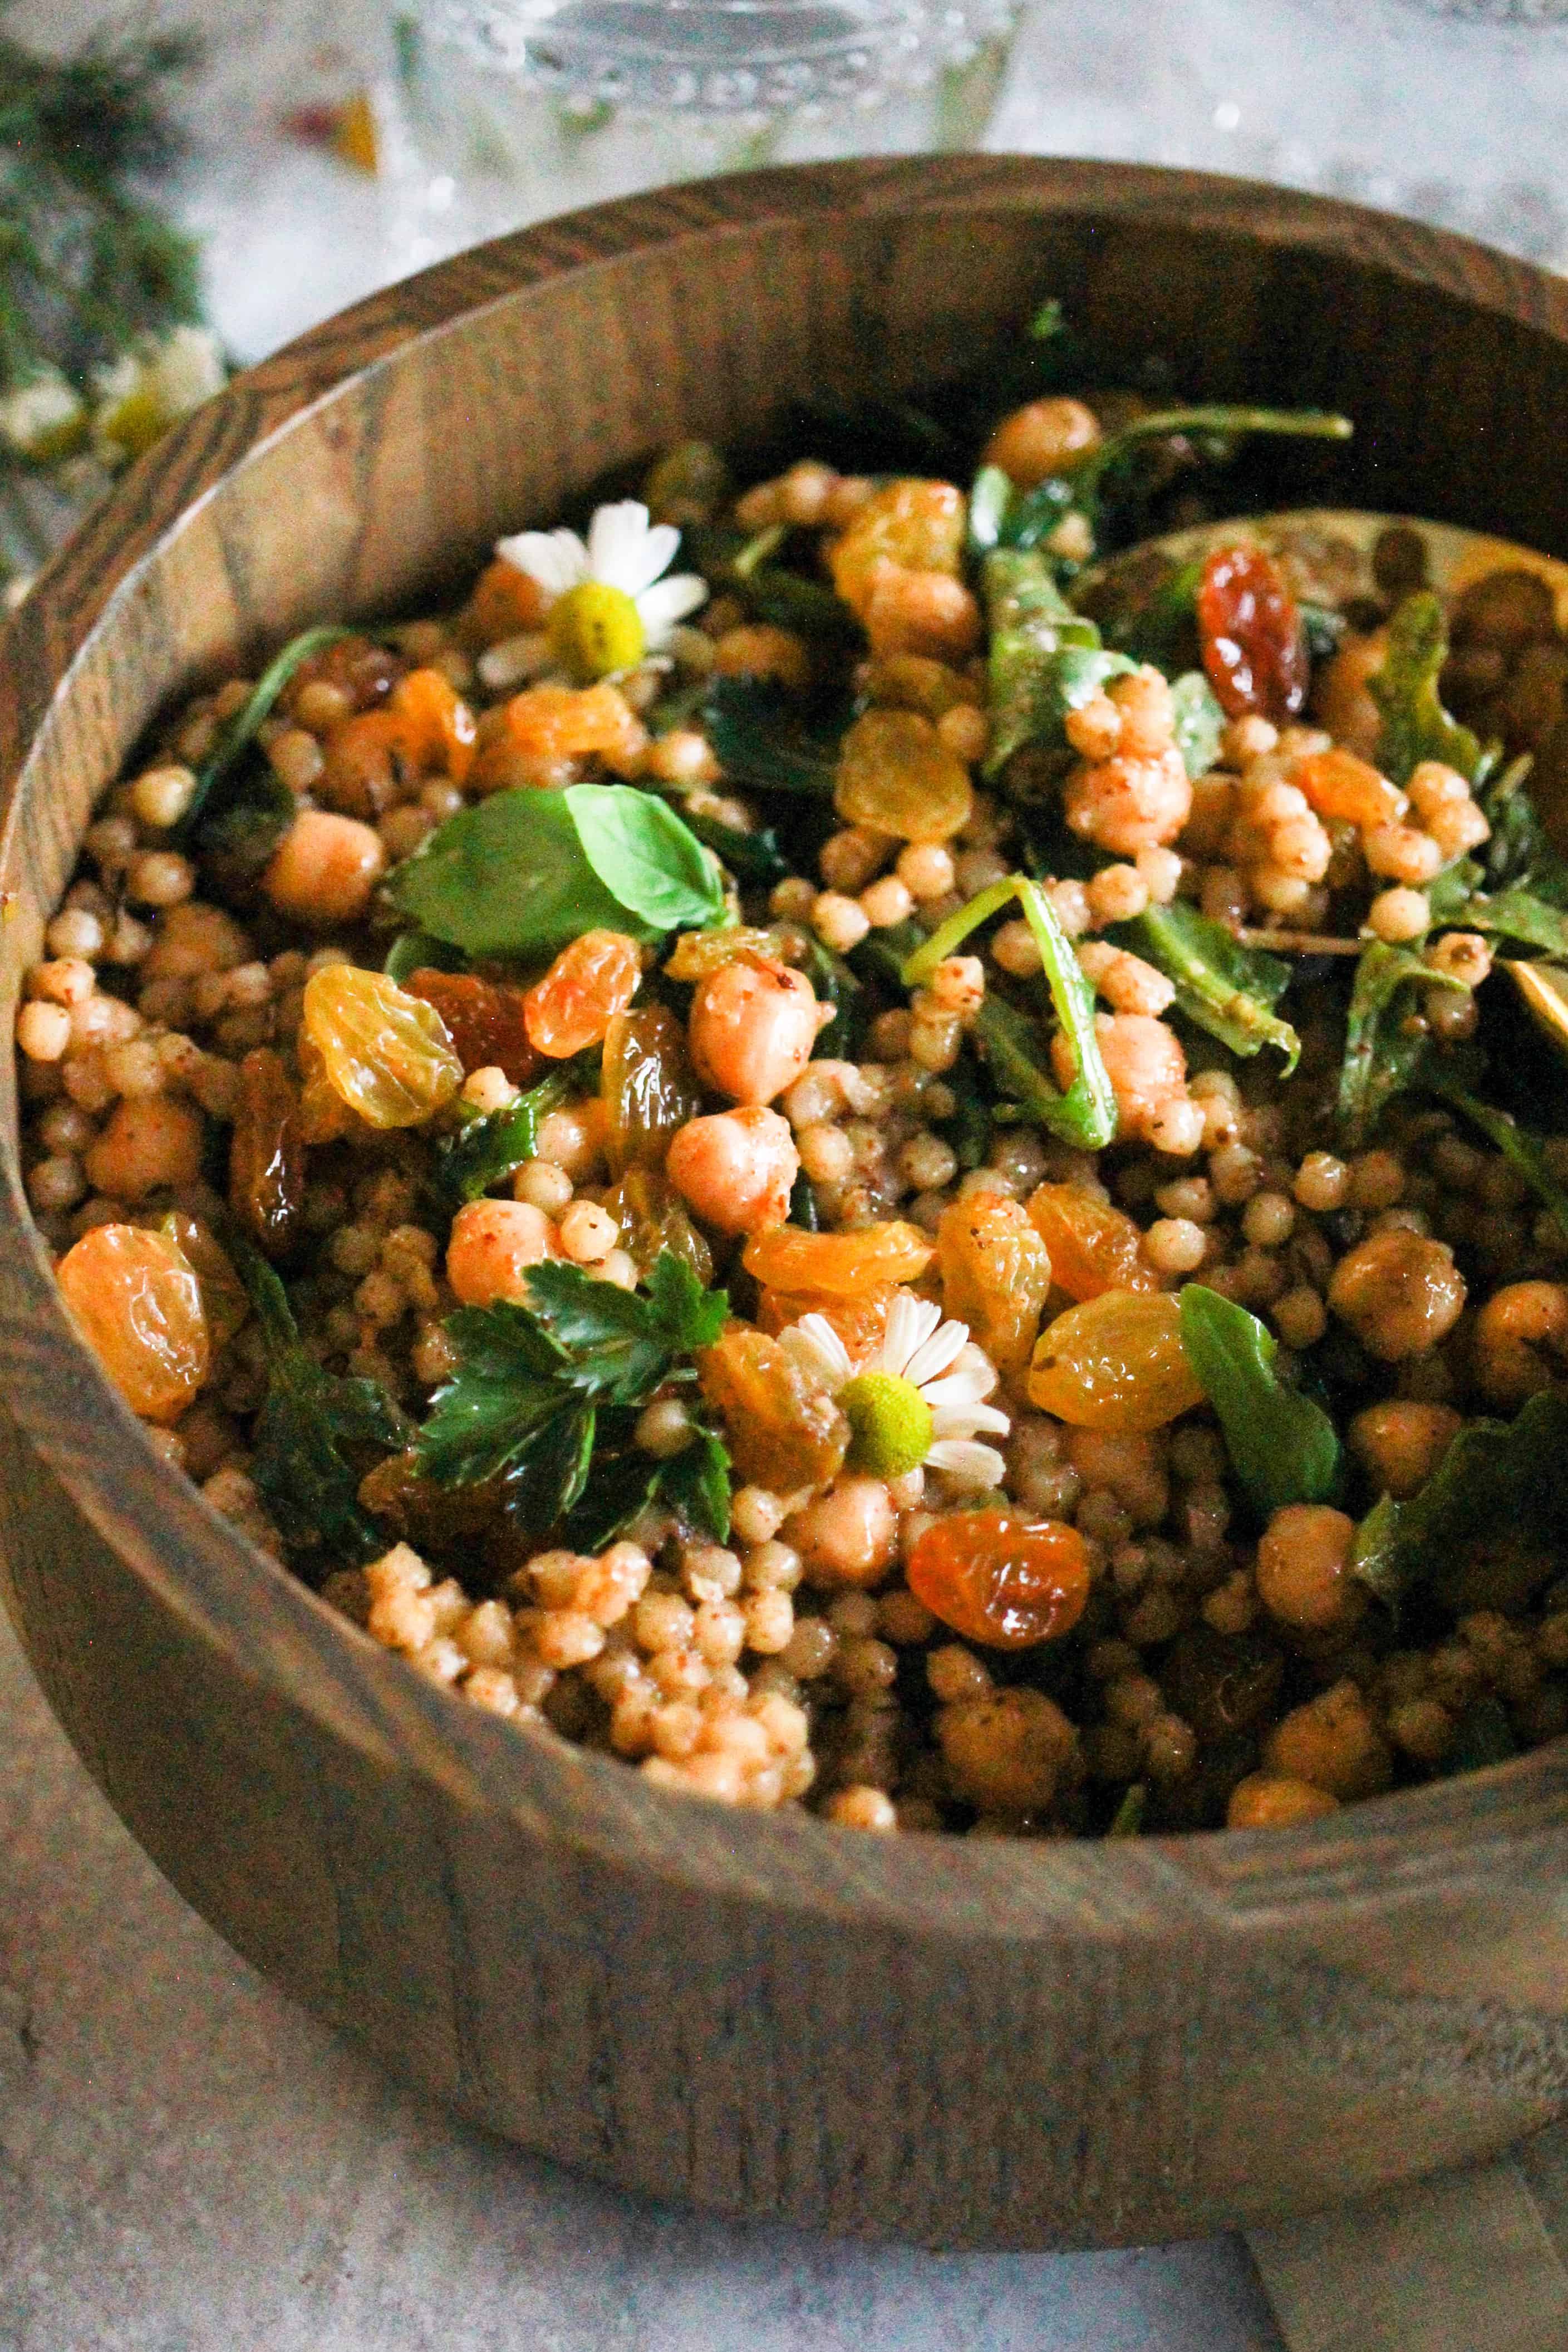 Israeli couscous with chickpeas and golden raisins in a wooden bowl.